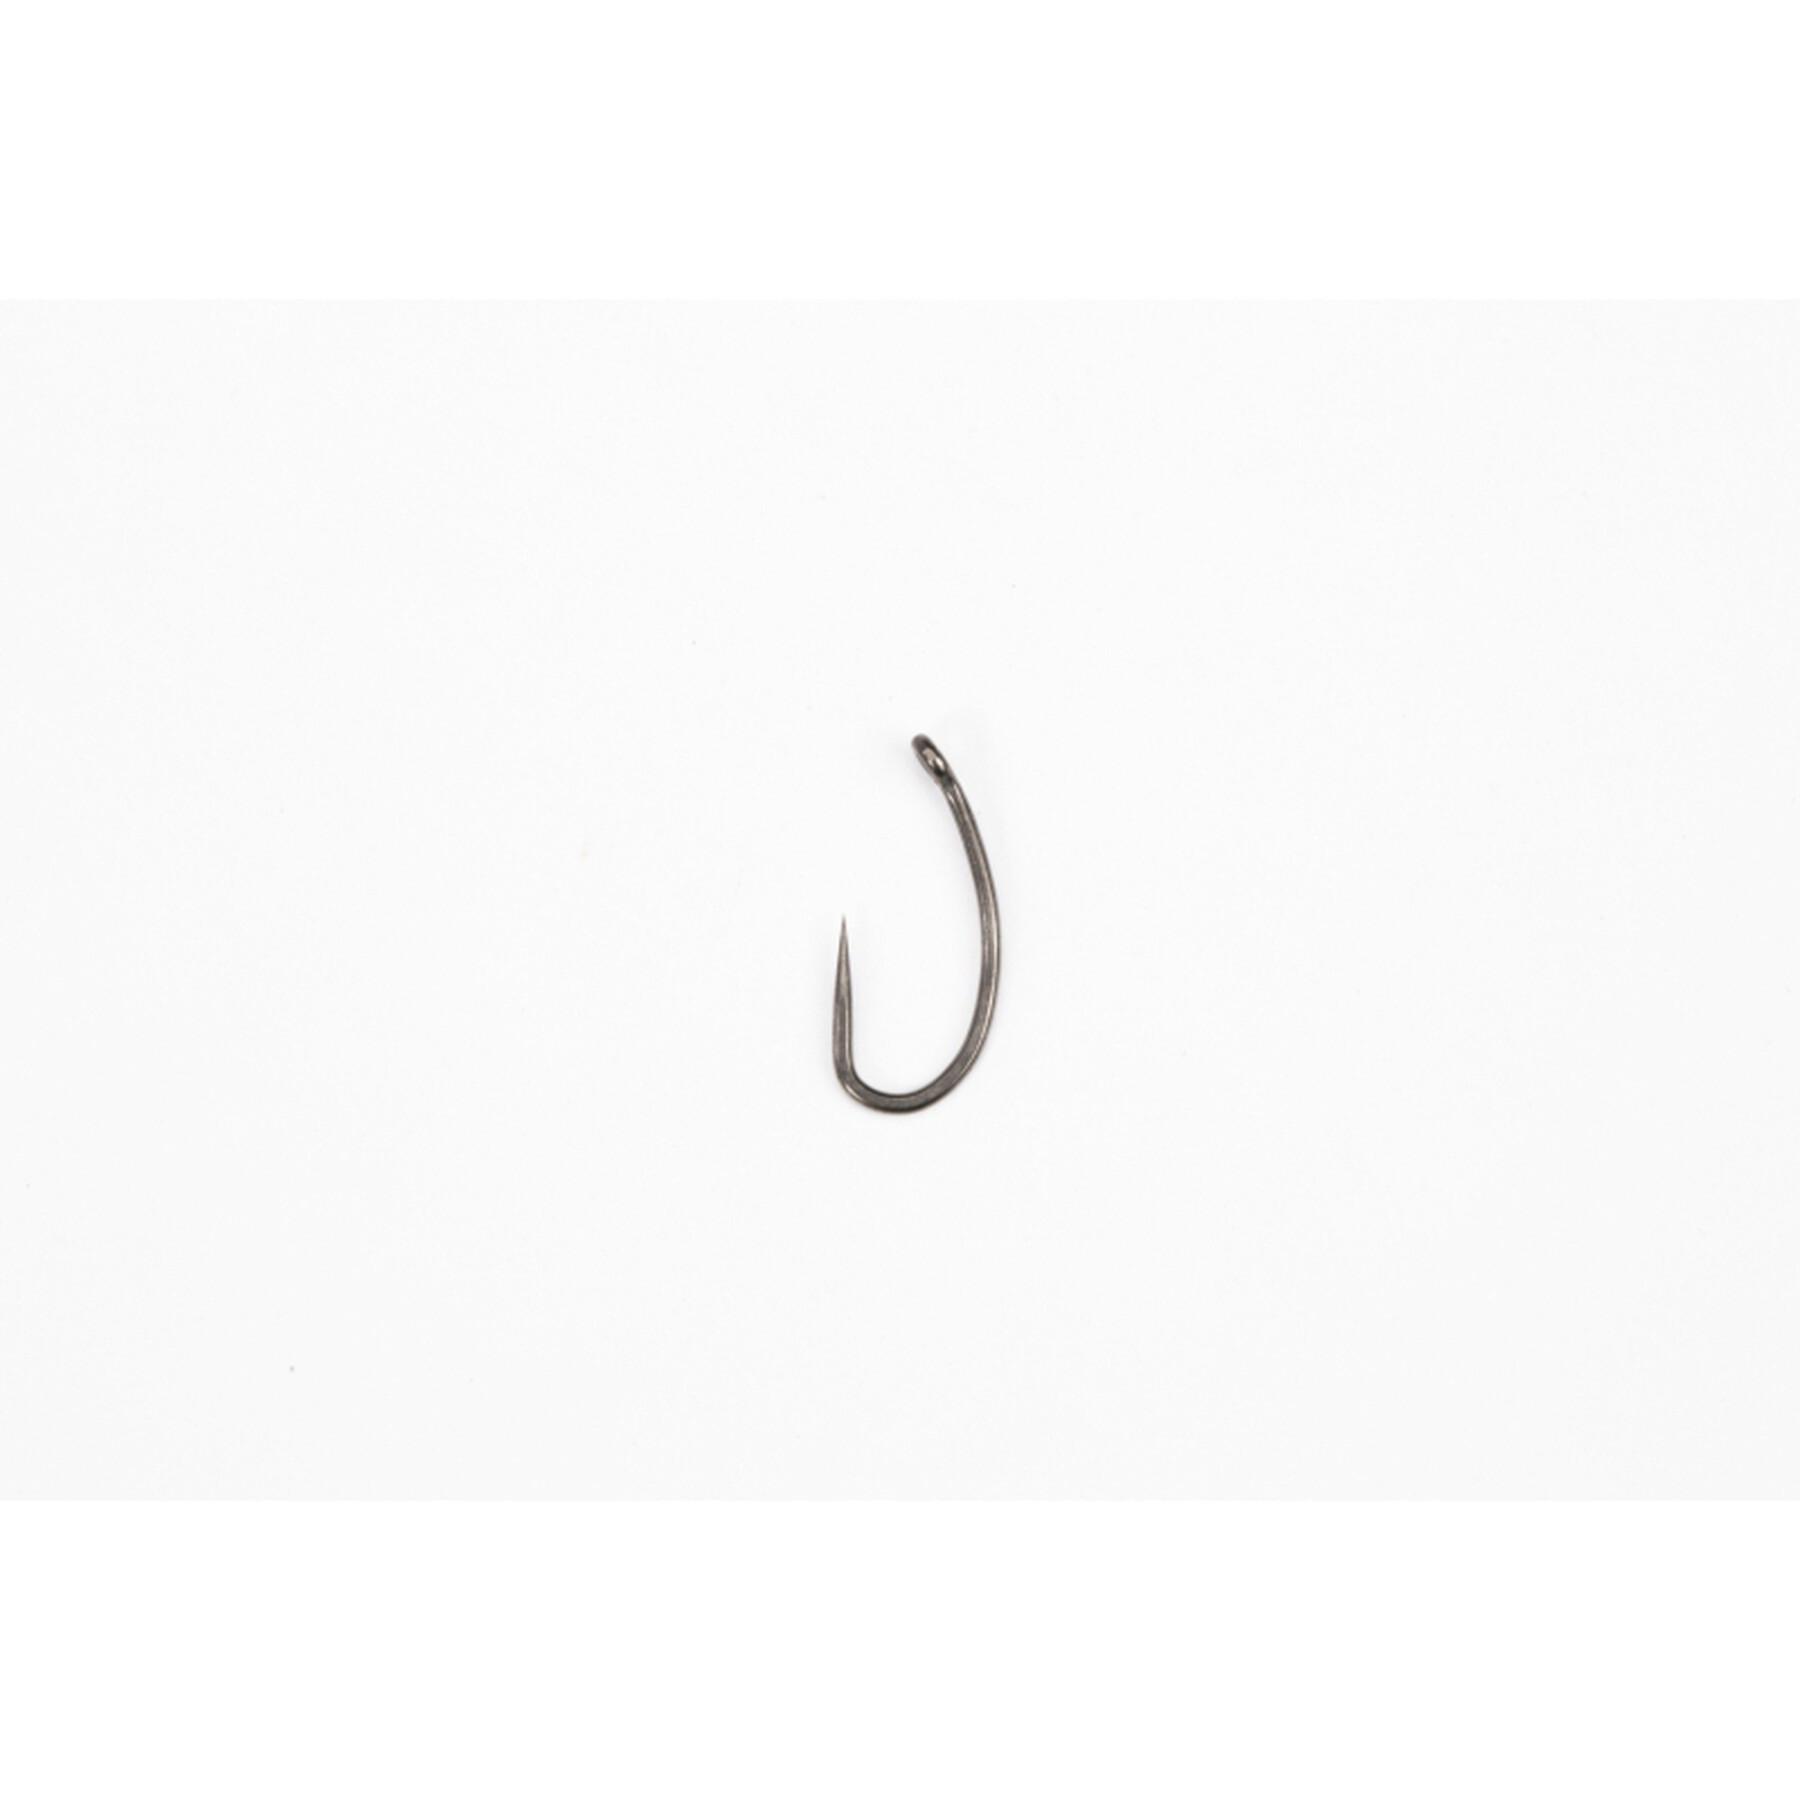 Hook Pinpoint Fang X size 1 Micro Barbed